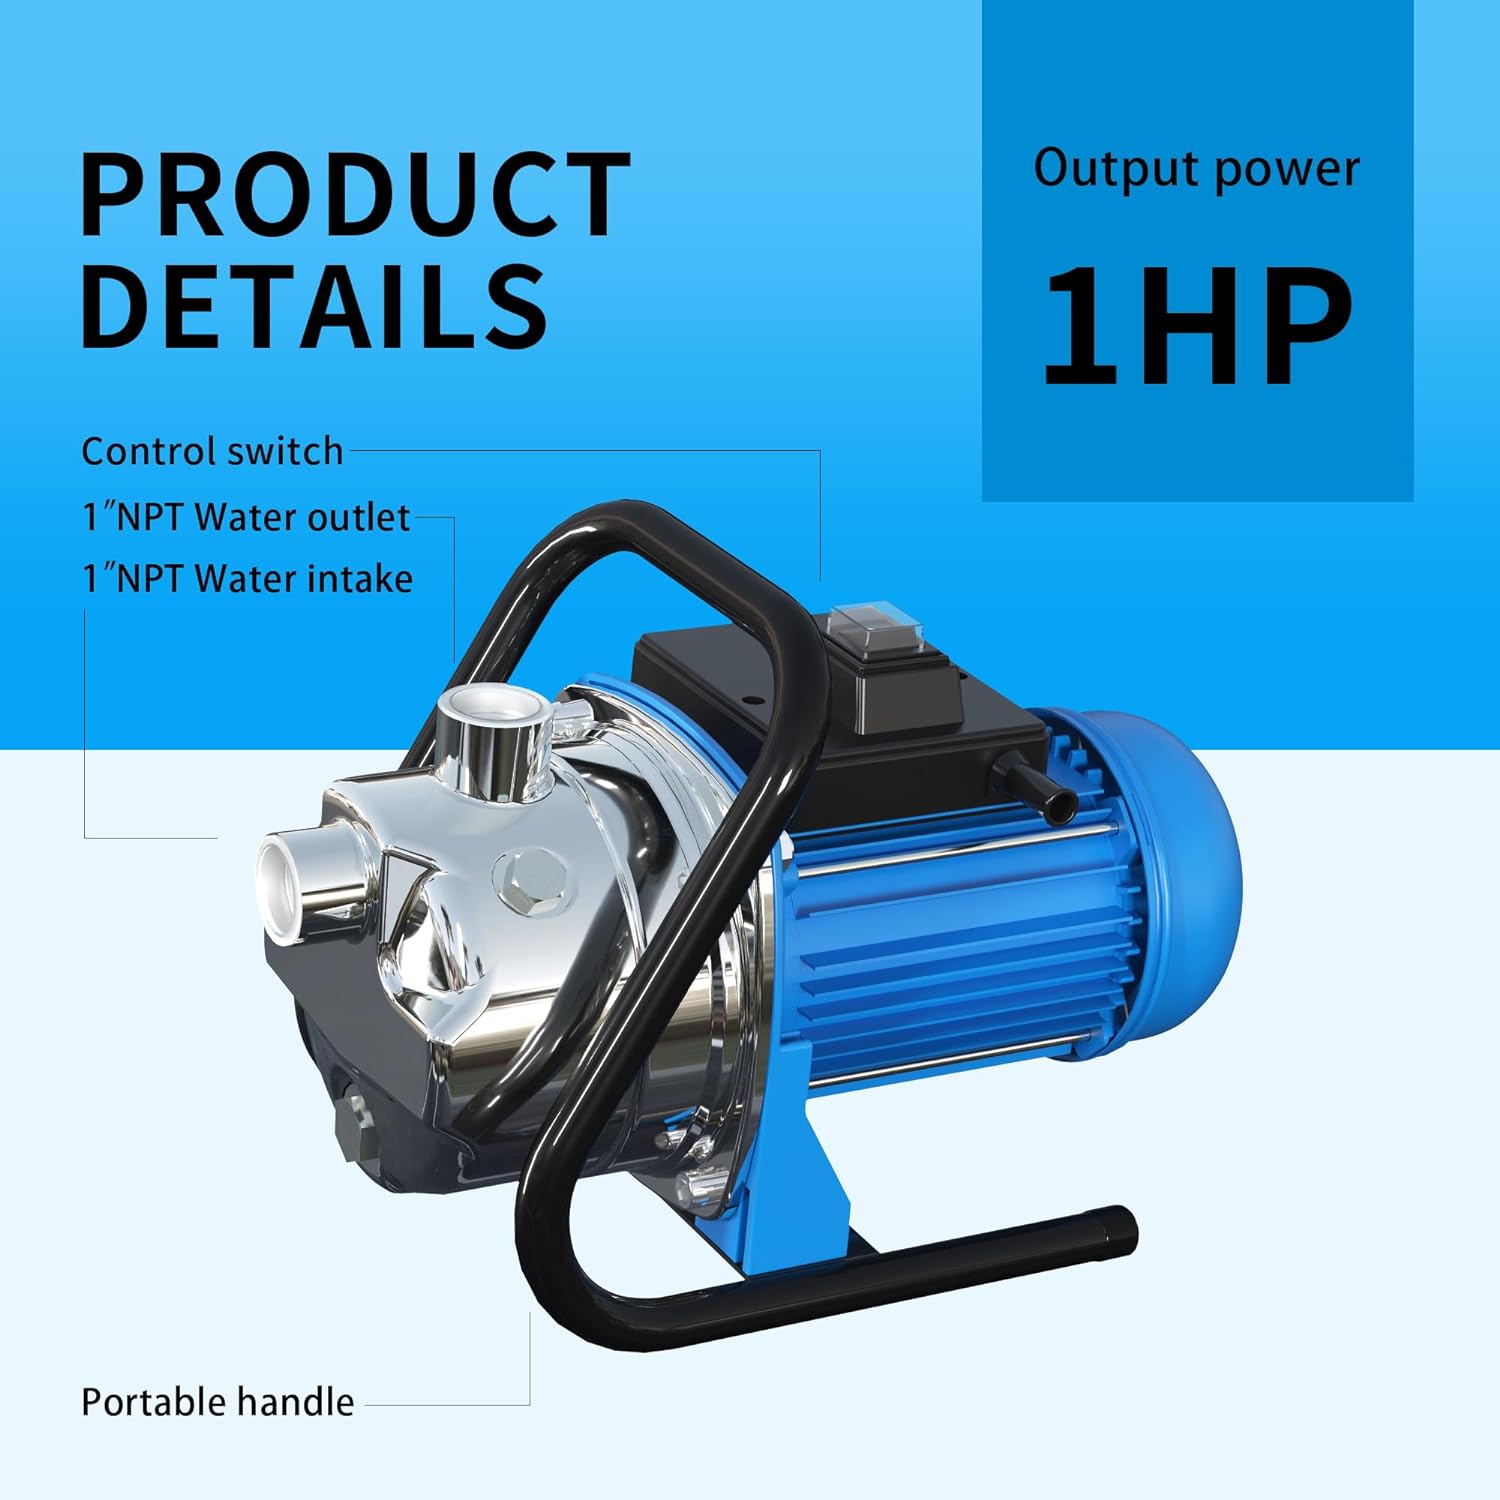 FOTING 1.5HP Shallow Well Pump with Pressure Tank, 1340GPH Irrigation Jet Pump, Automatic Water Booster System for Home Garden Lawn Farm